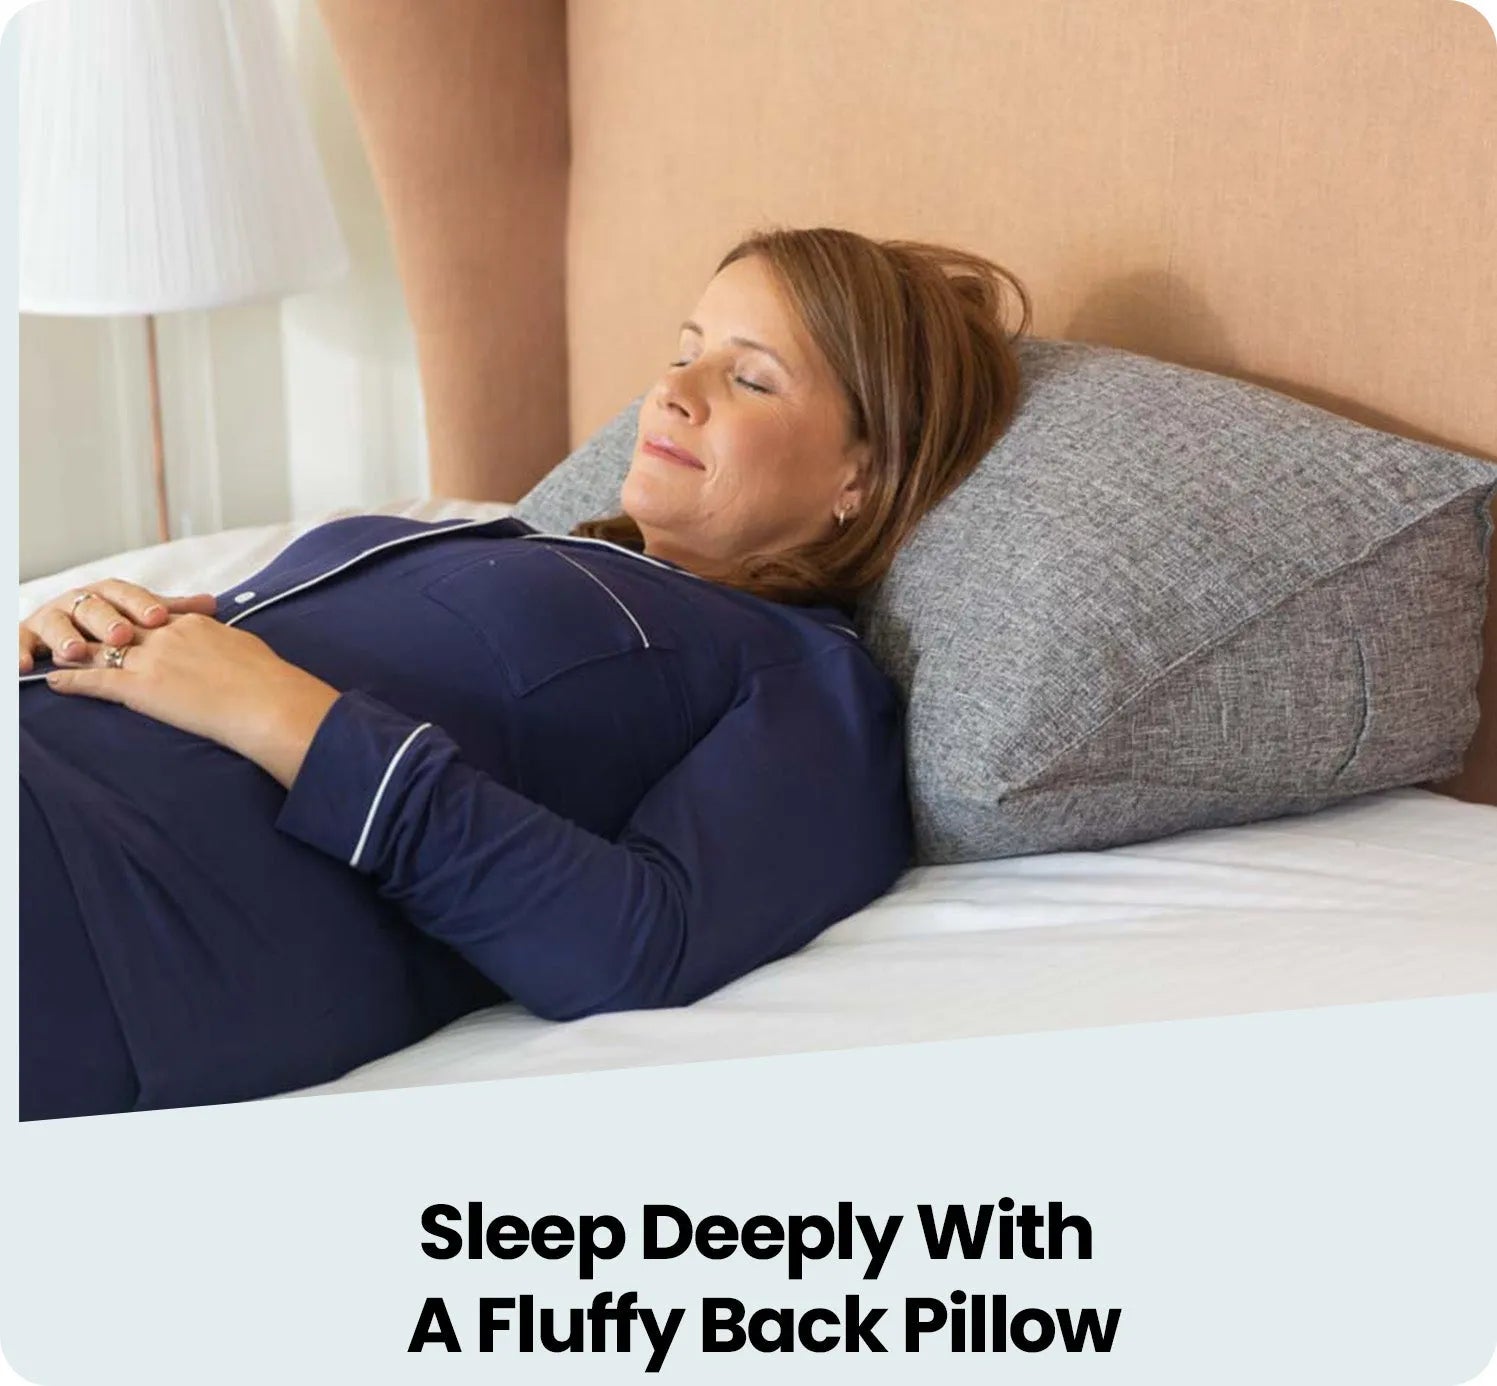 files/sleep_deeply_with_a_fluffy_back_pillow.webp